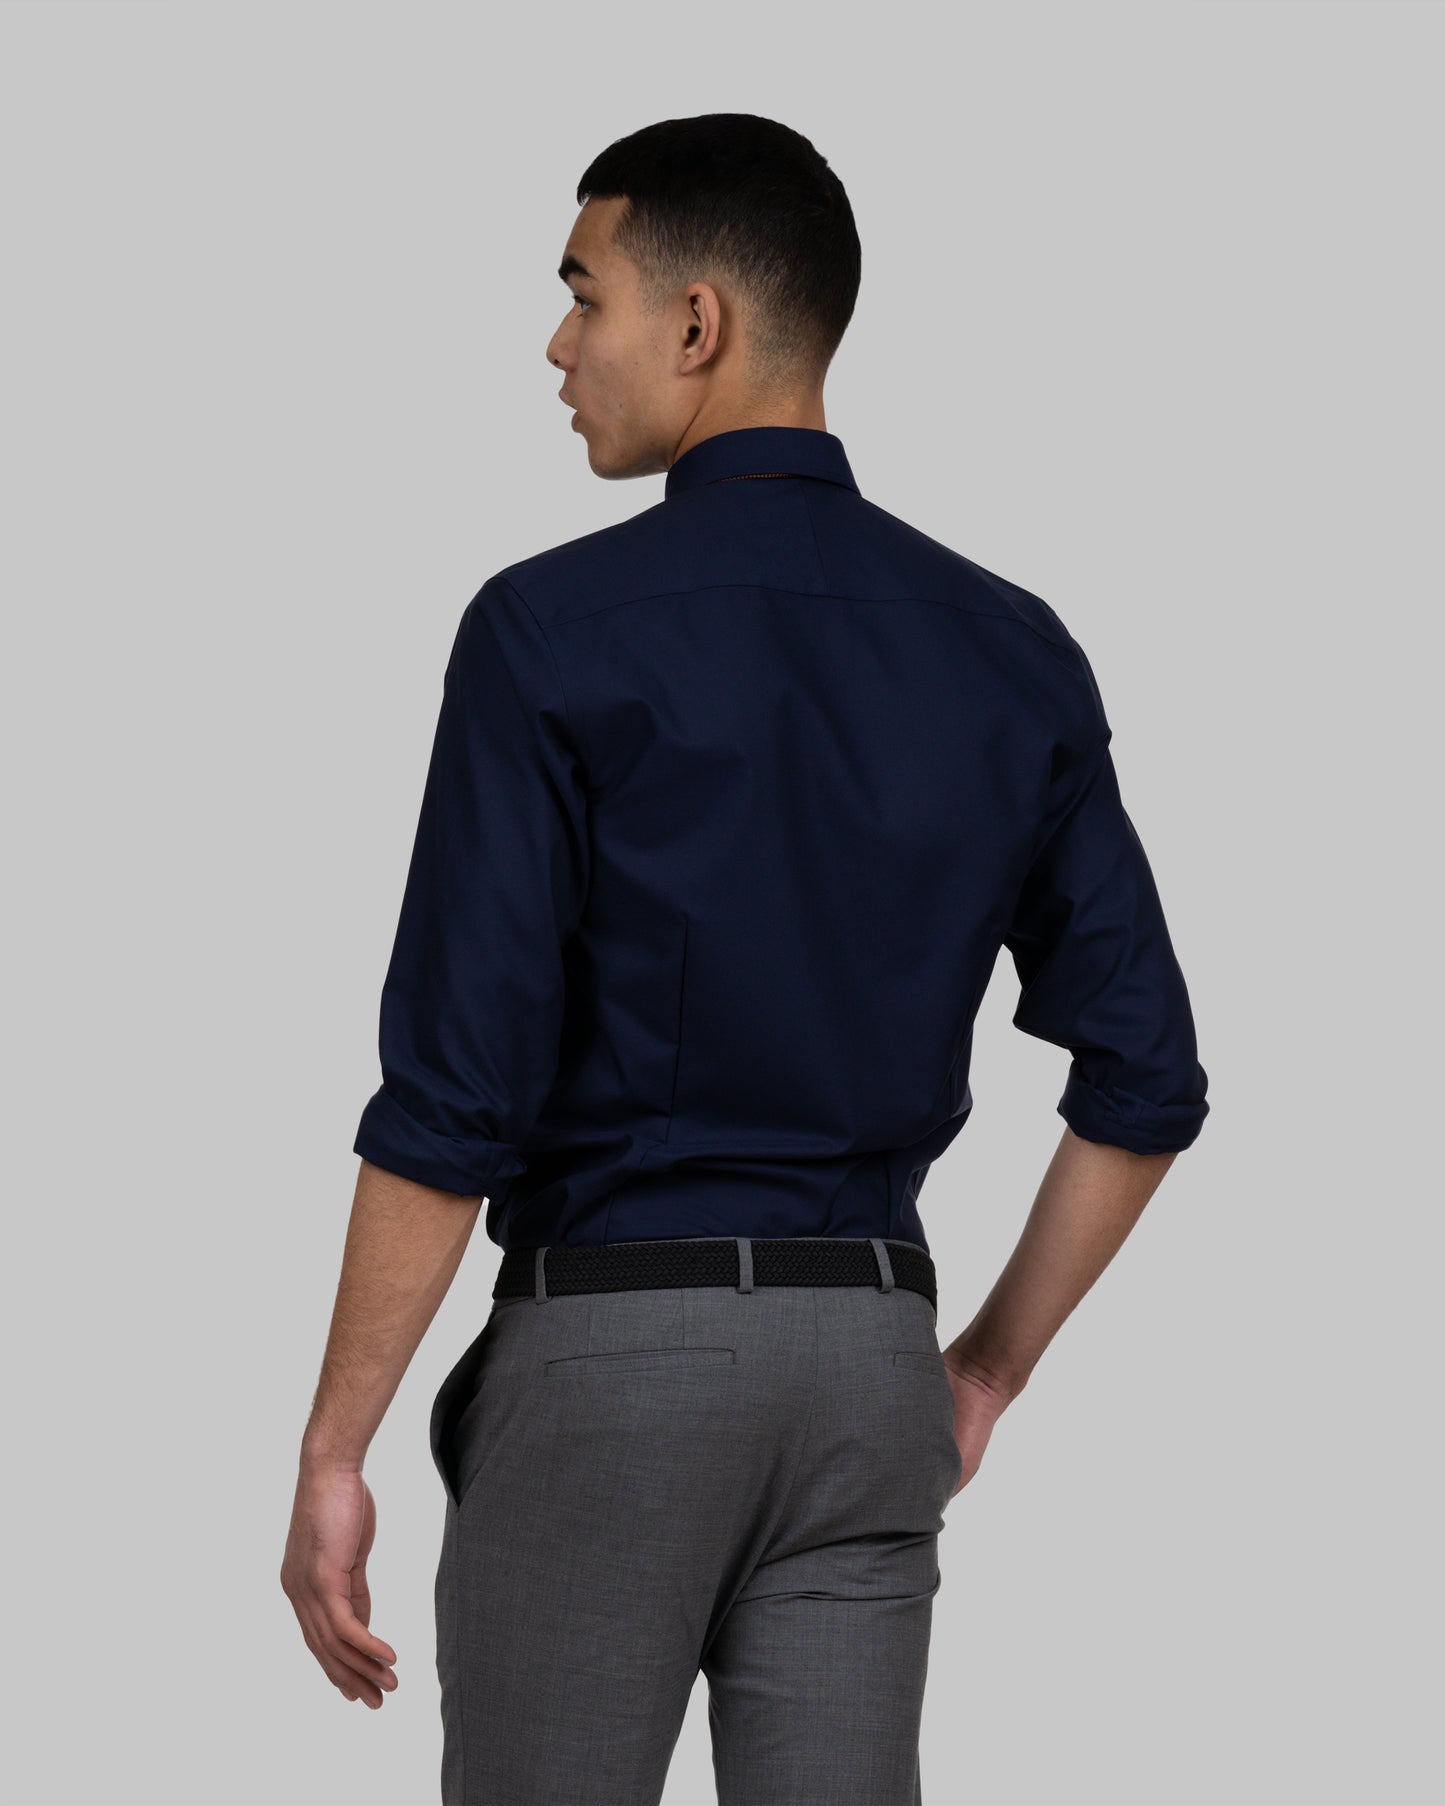 Red Bow 121 Navy Non-Iron Stretch